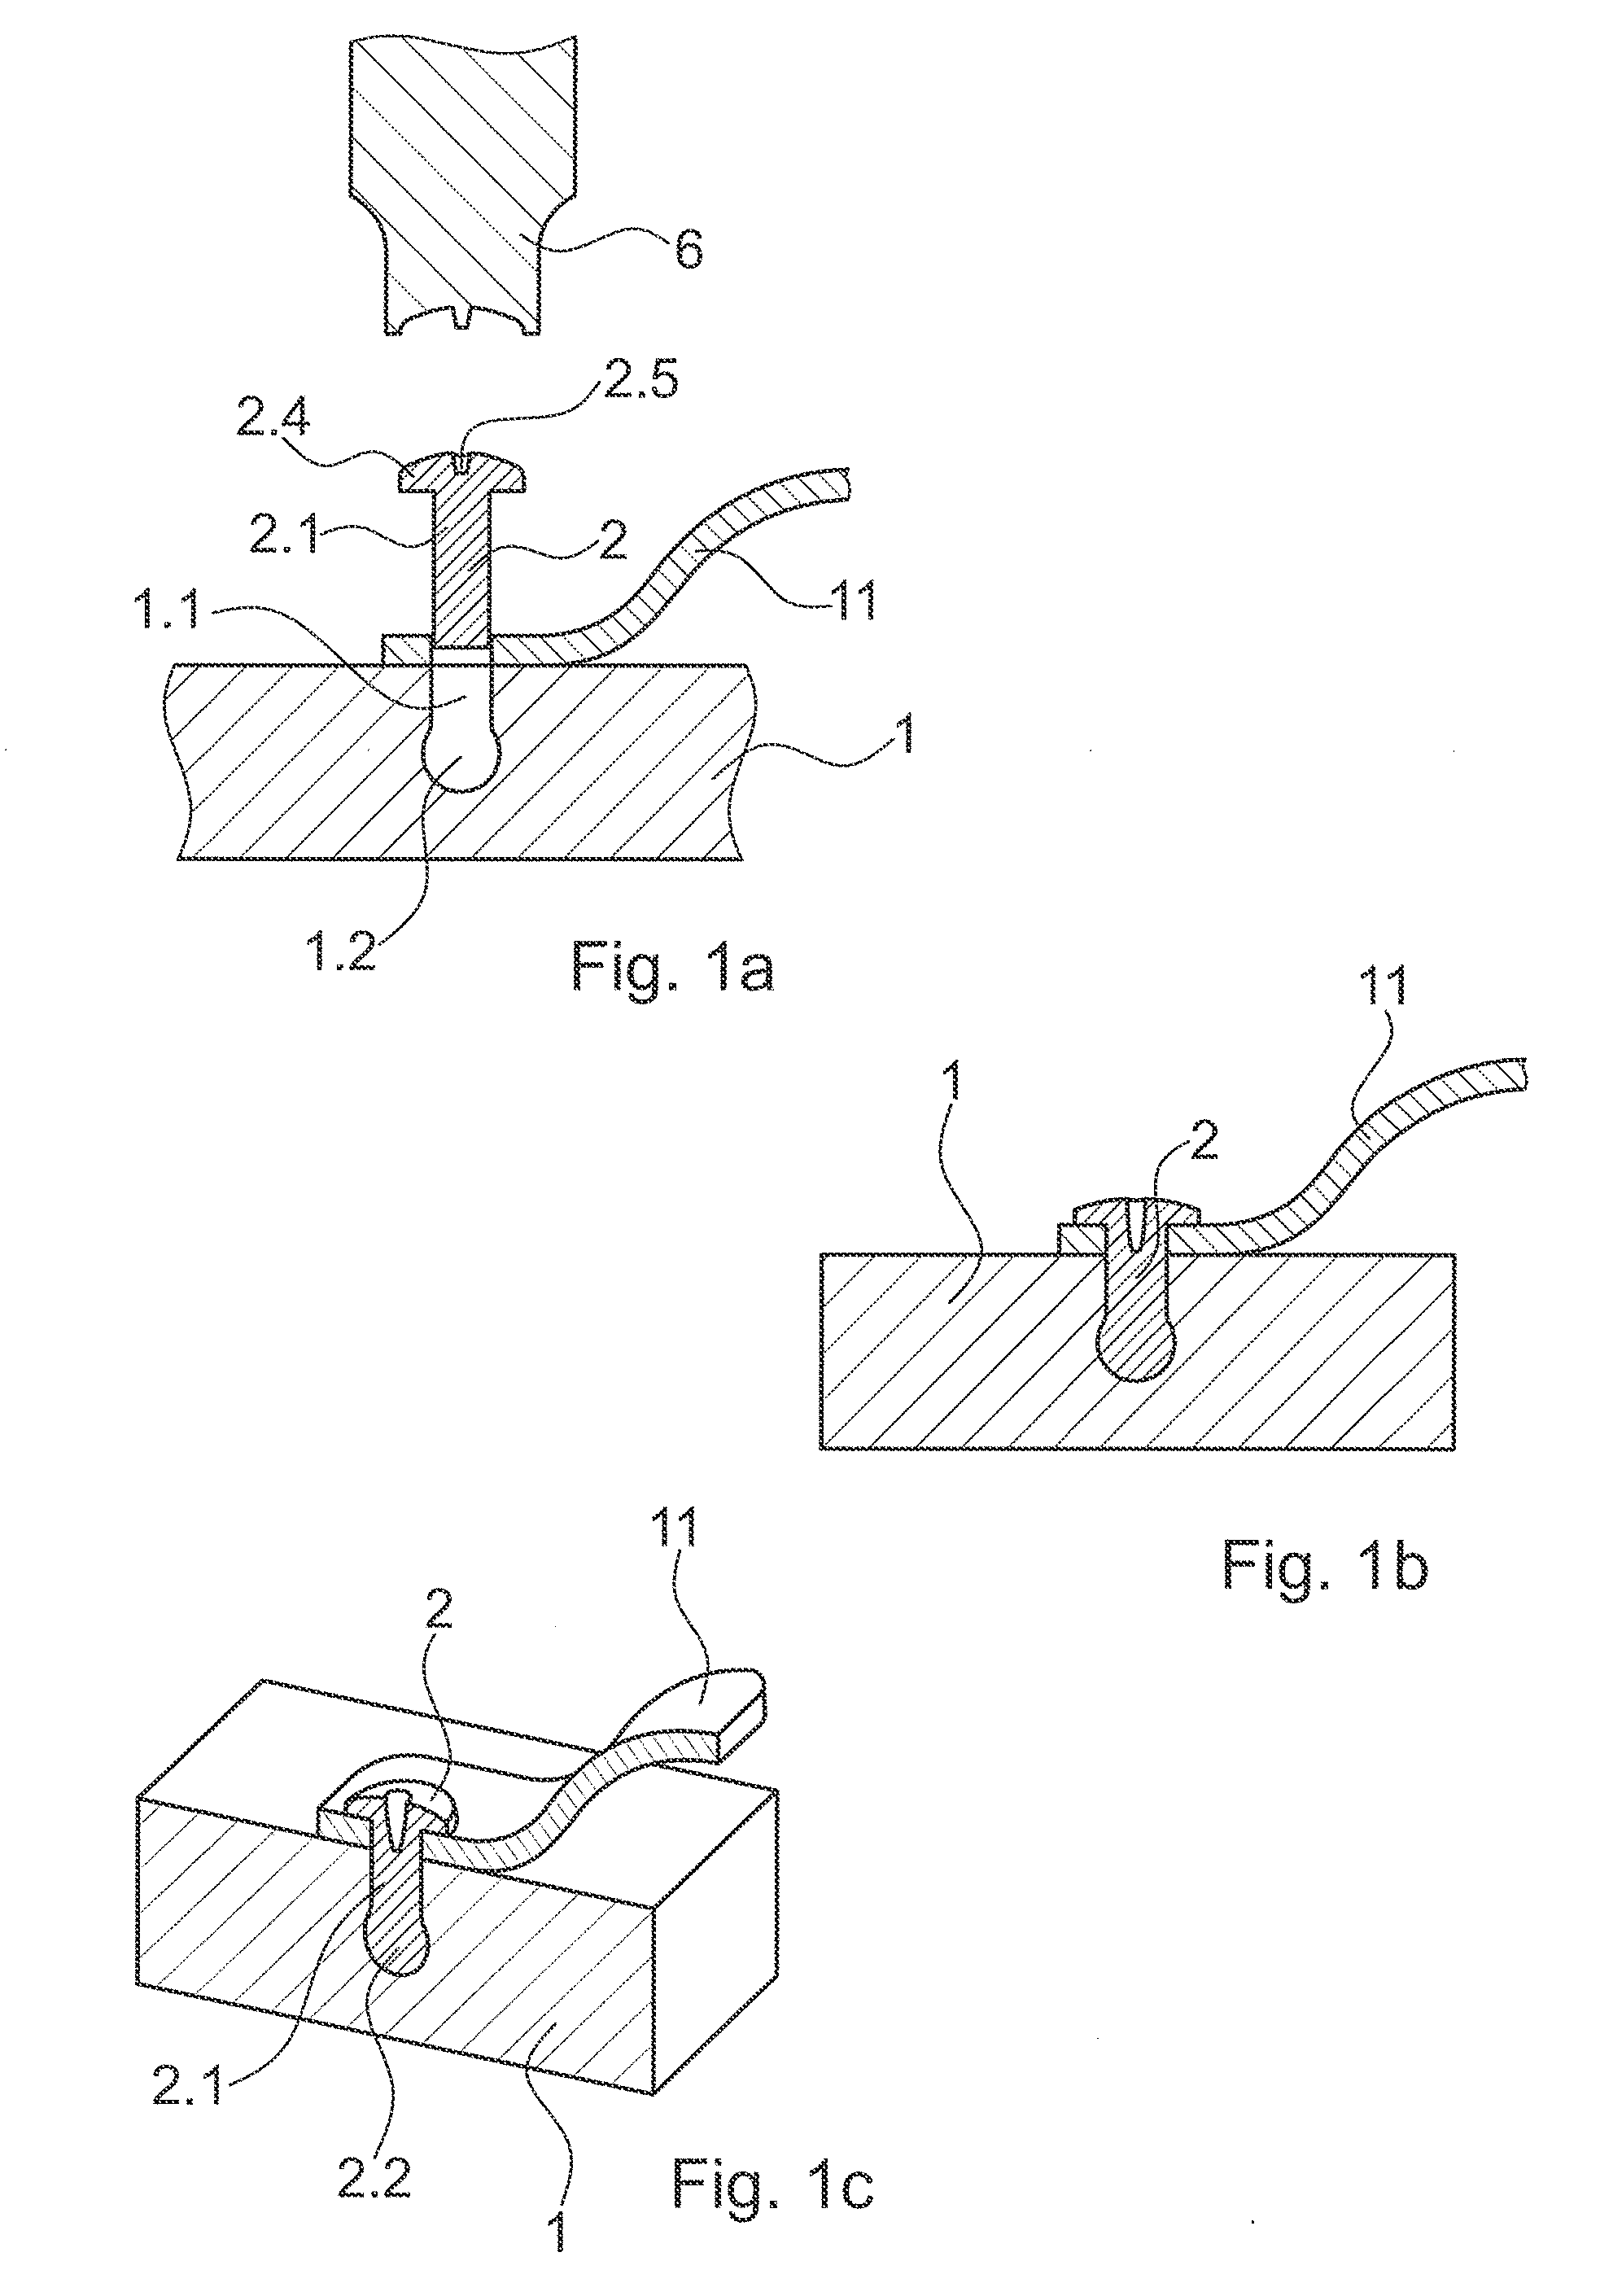 Method for connecting parts relative to one another